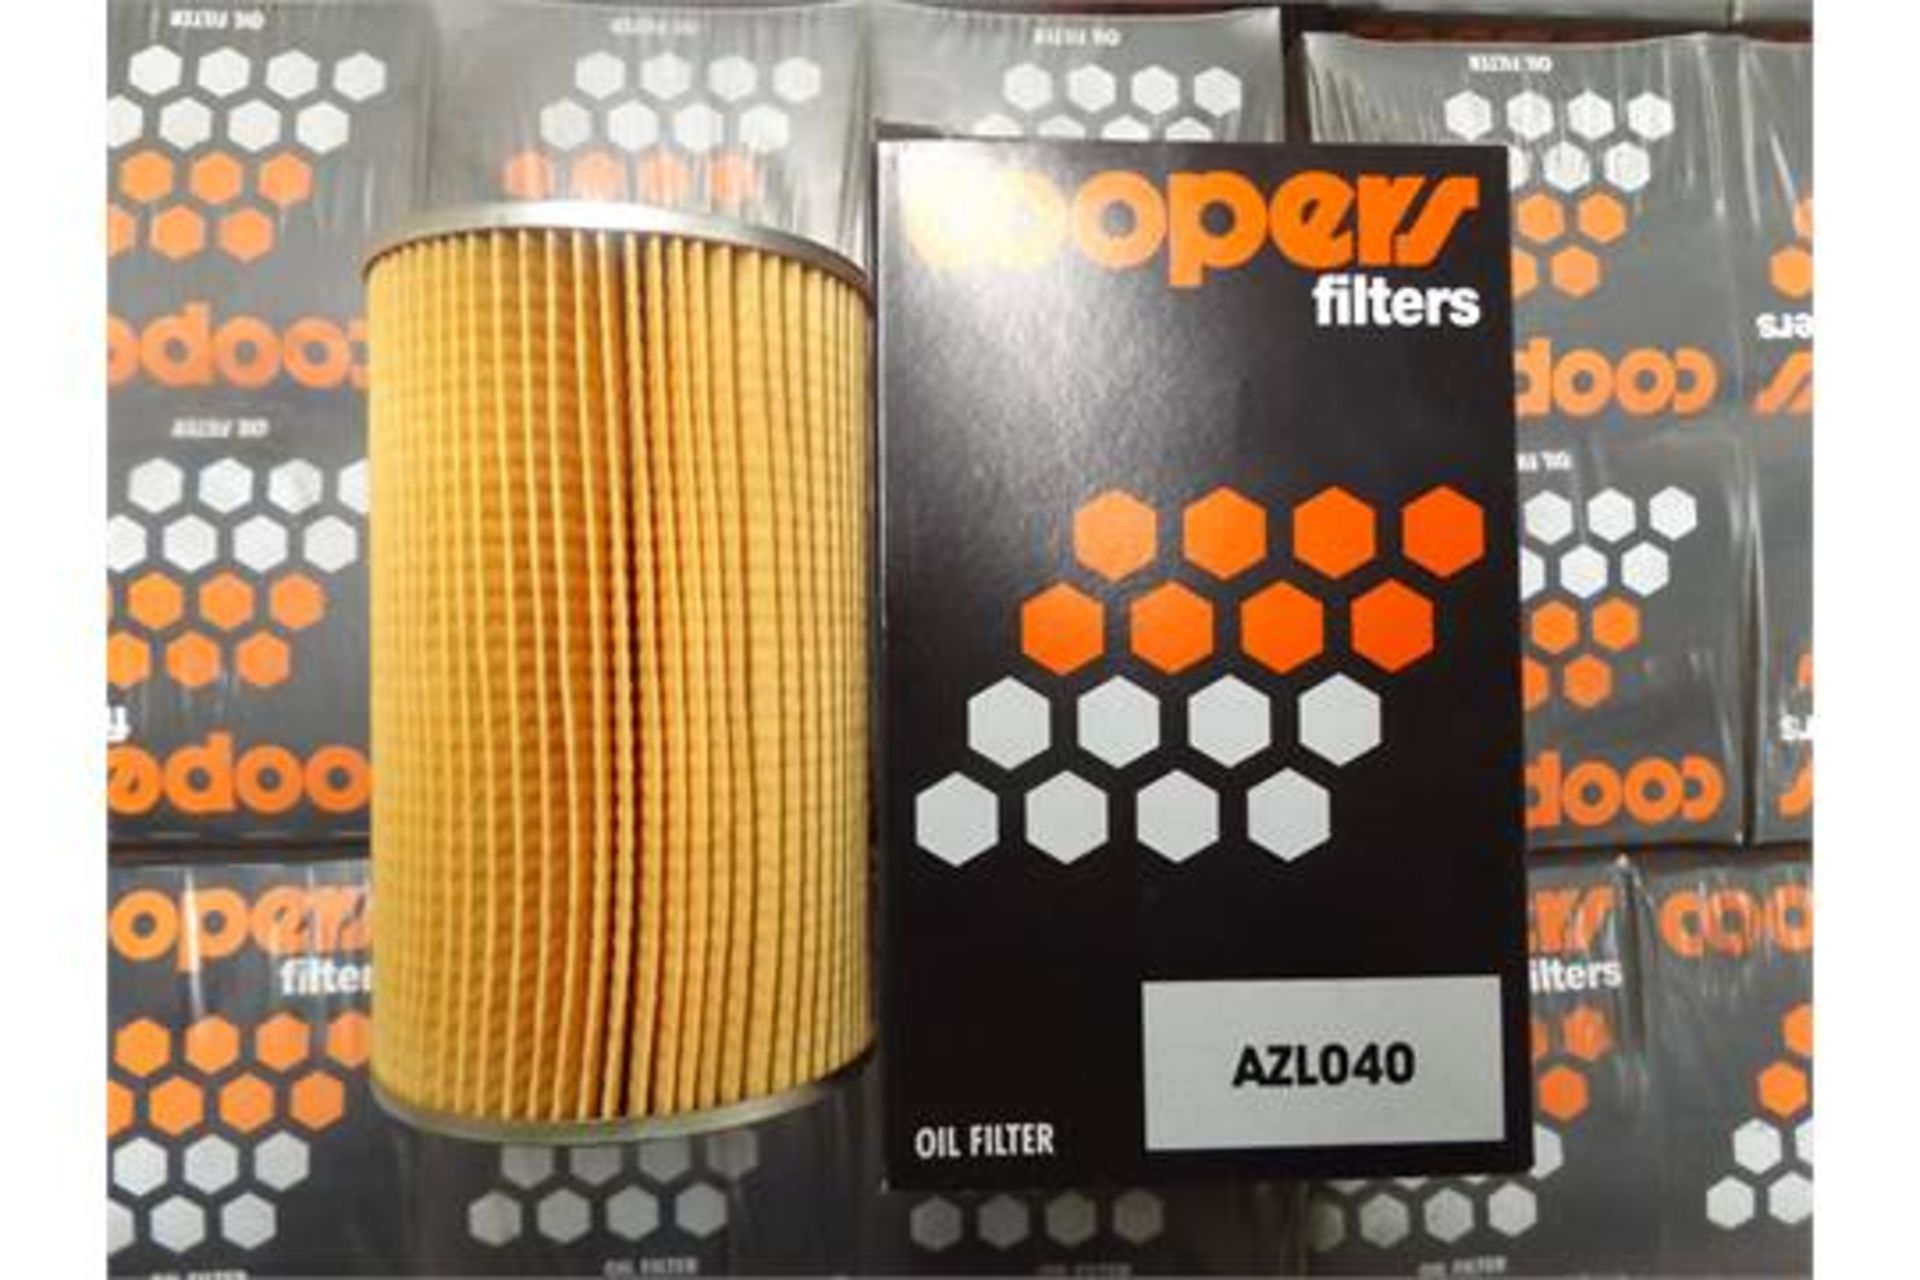 Approx. 650 x Coopers AZL040 Oil Filters - Image 2 of 5